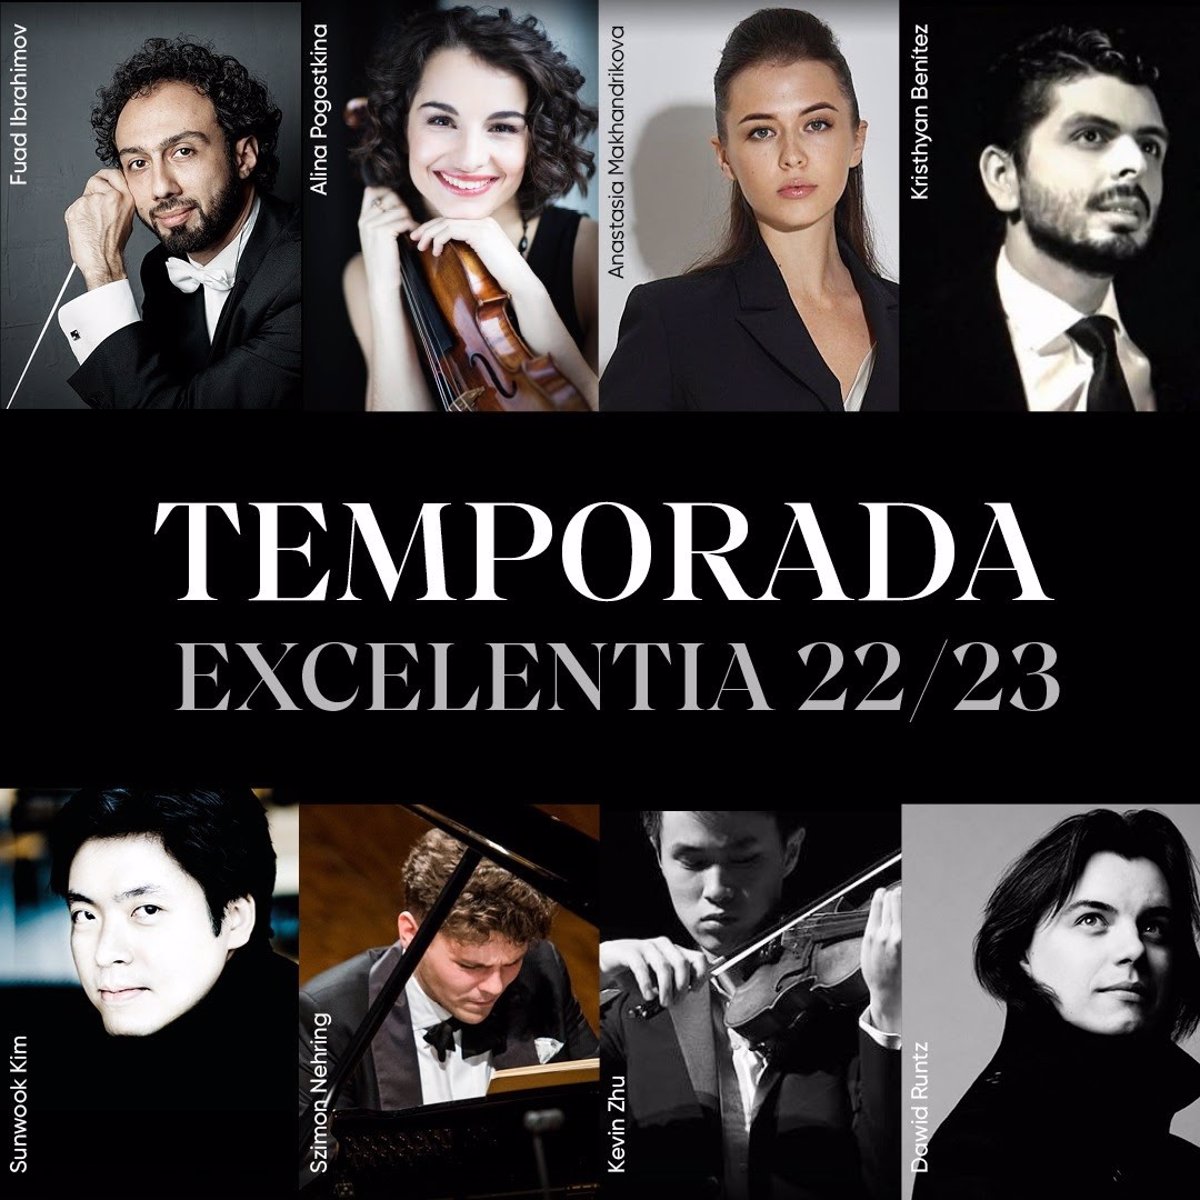 ‘Immortal Beethoven’, ‘Handel’s Messiah’ or ‘West Side Story’, main attractions for 22/23 at Auditorio Nacional